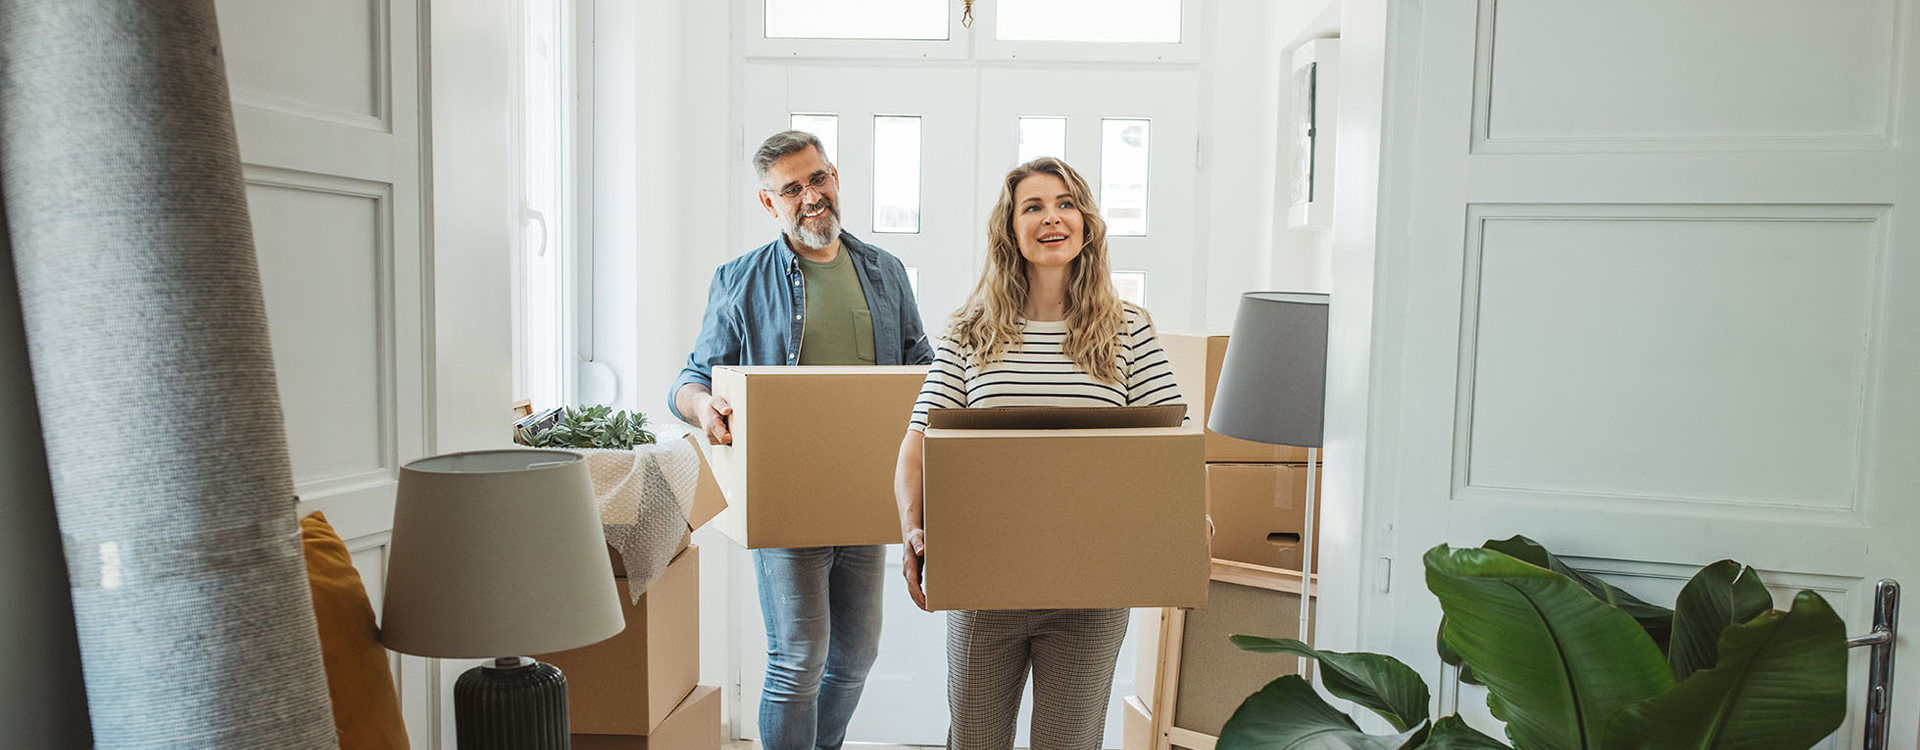 Mature couple moves in to their new home, unpacking boxes and enjoying the time together.